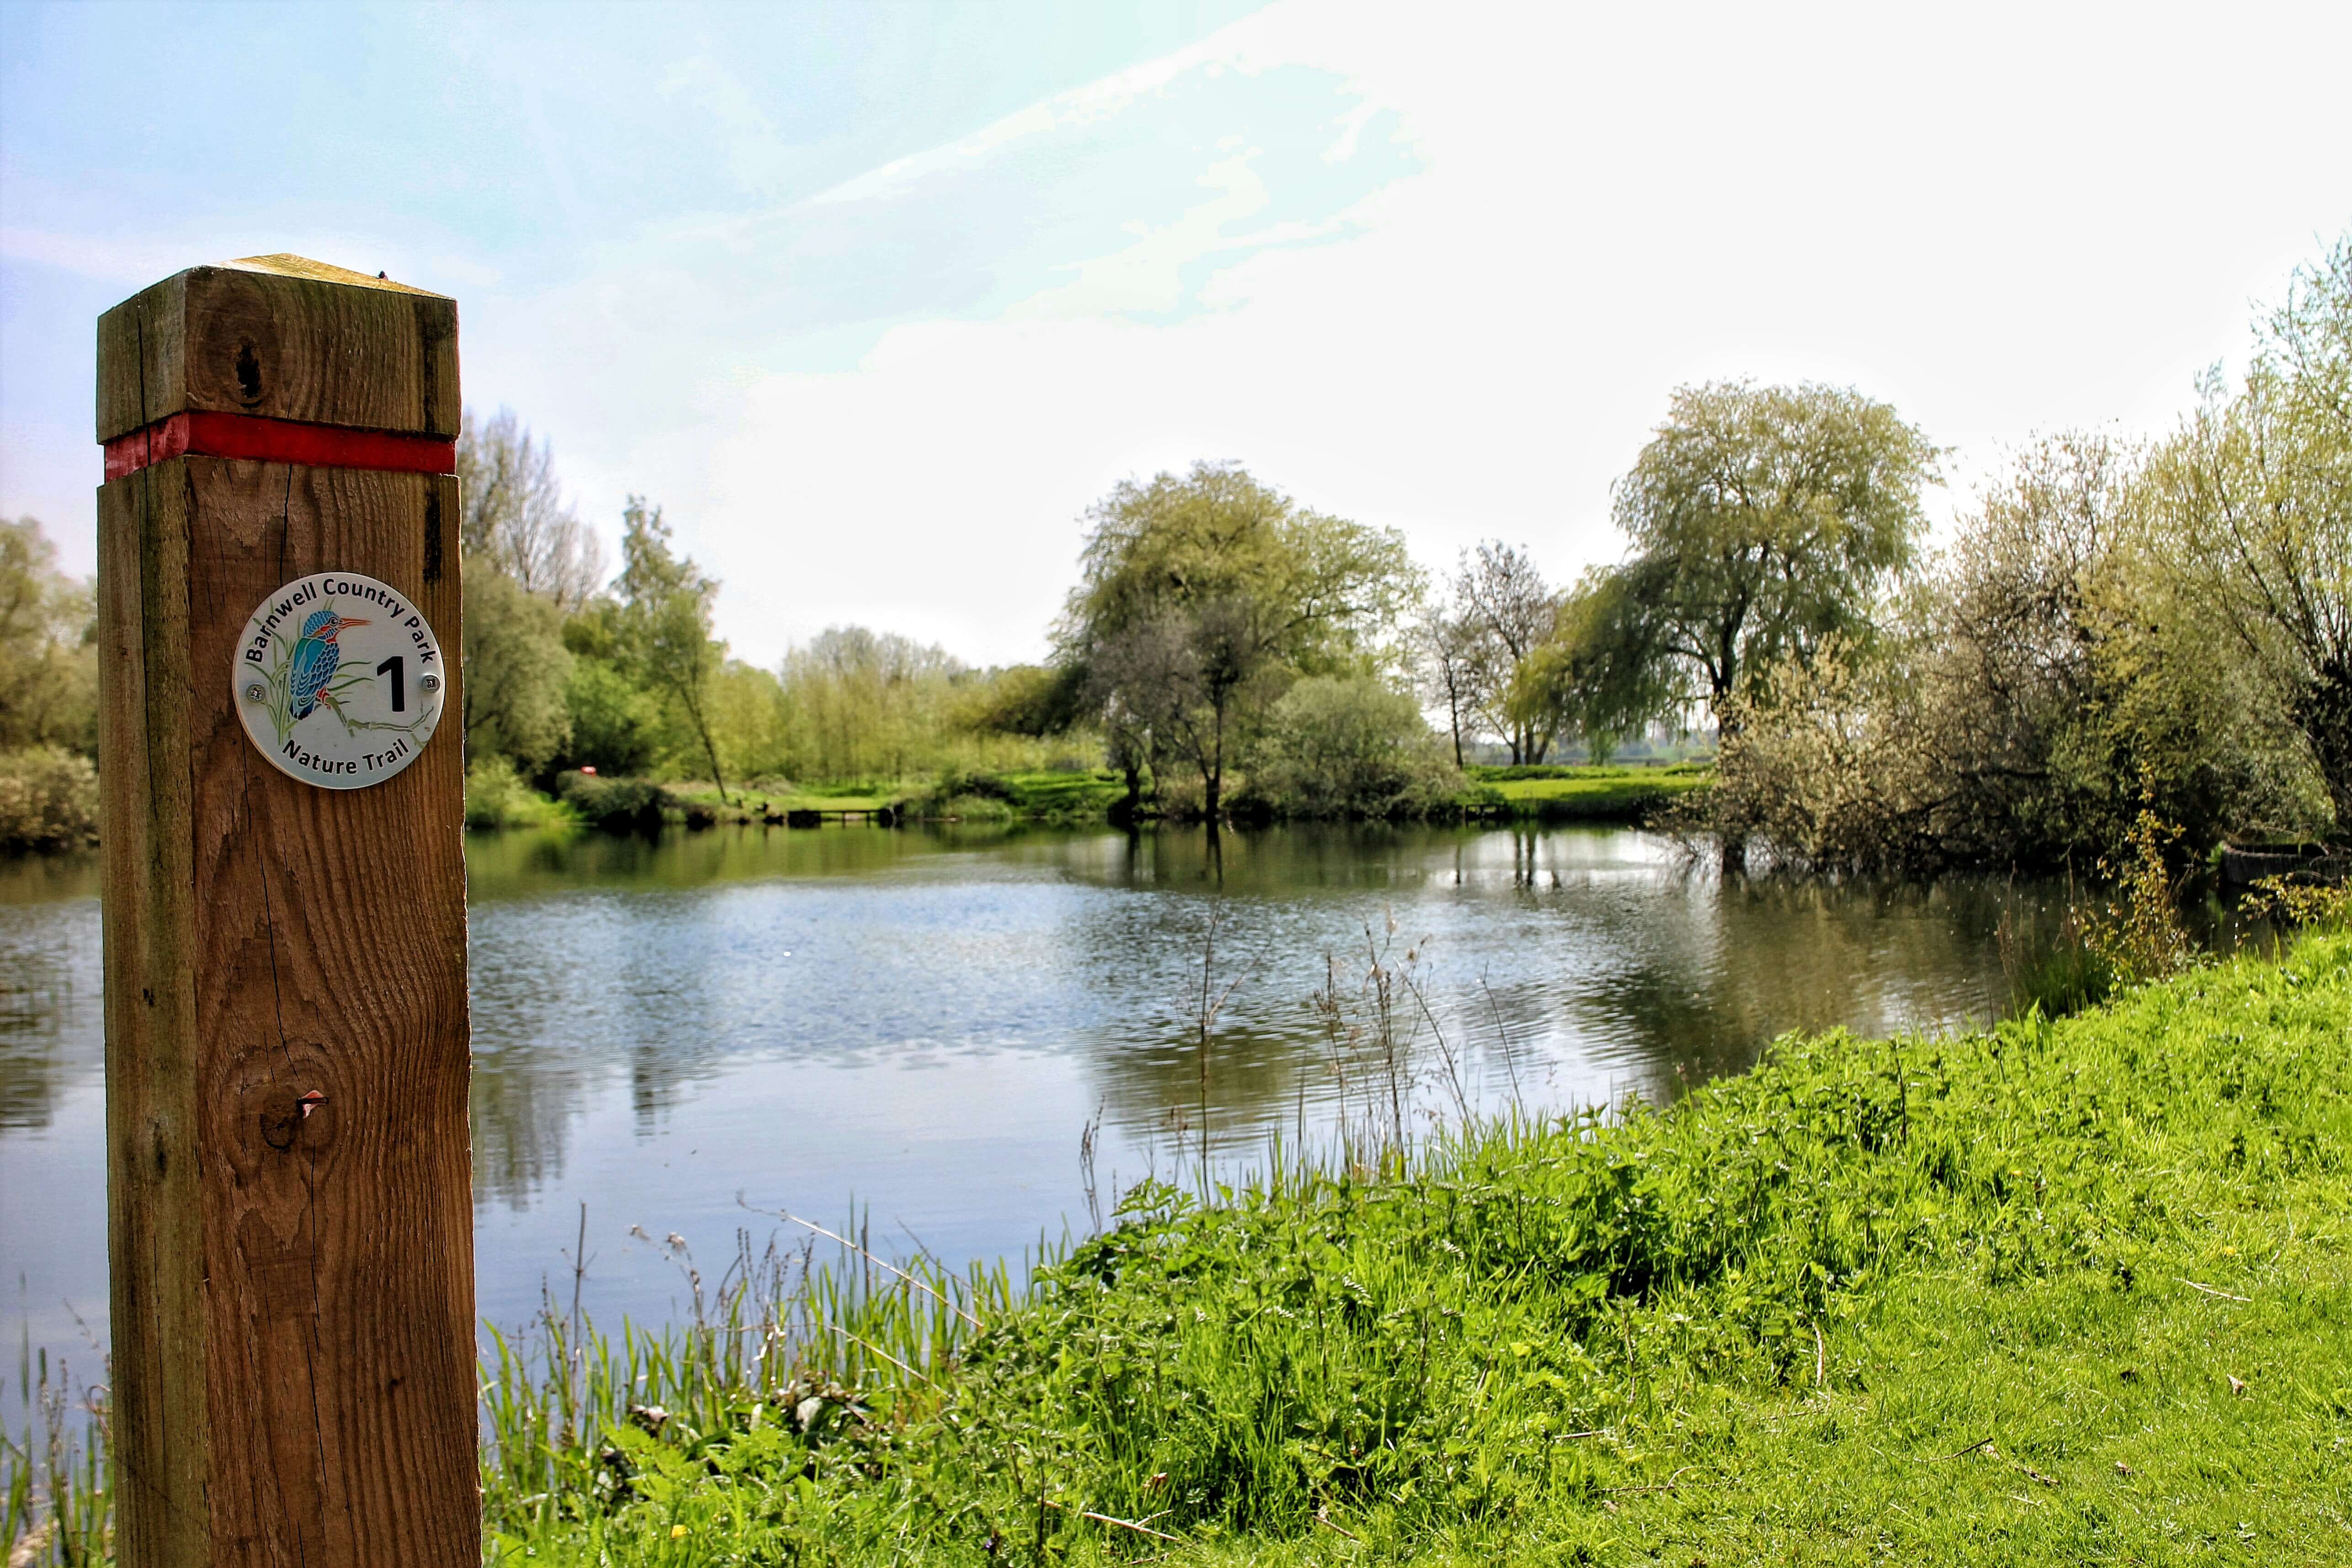 A sign indicating the nature trail at Barnwell Country Park, a lake is in the background